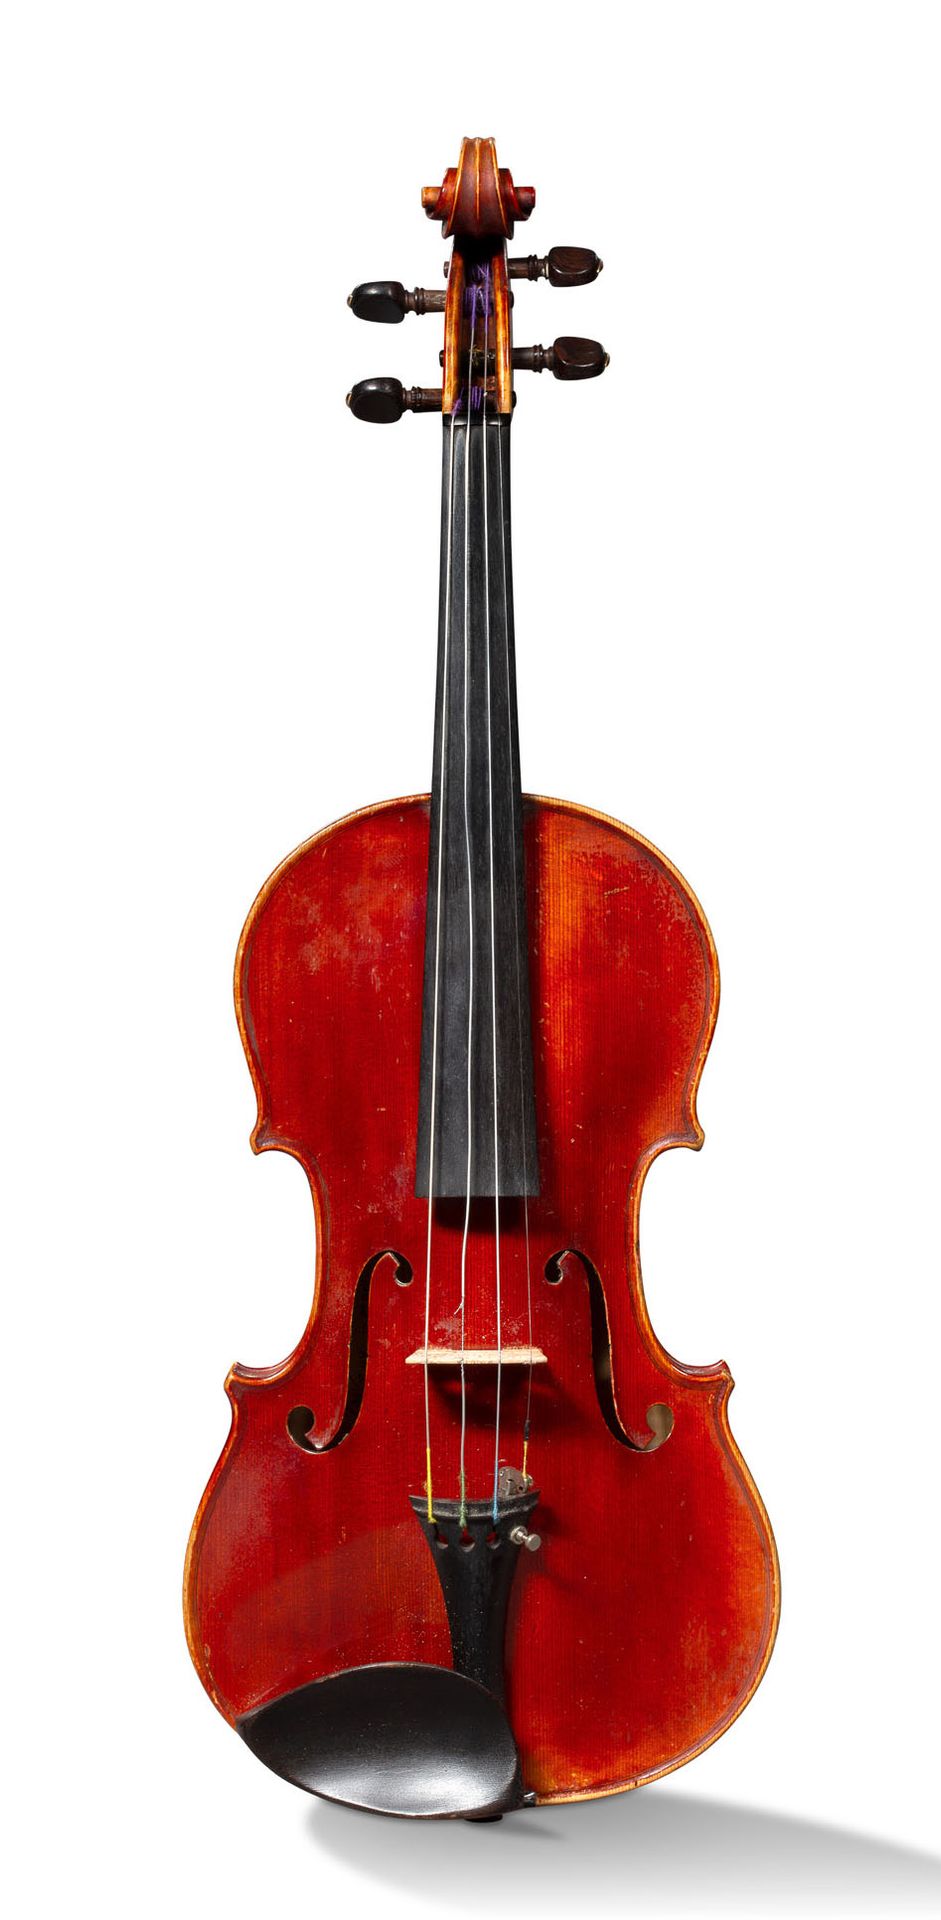 Null Violin made by Paul Kaul in Paris in 1949 with the original label and the i&hellip;